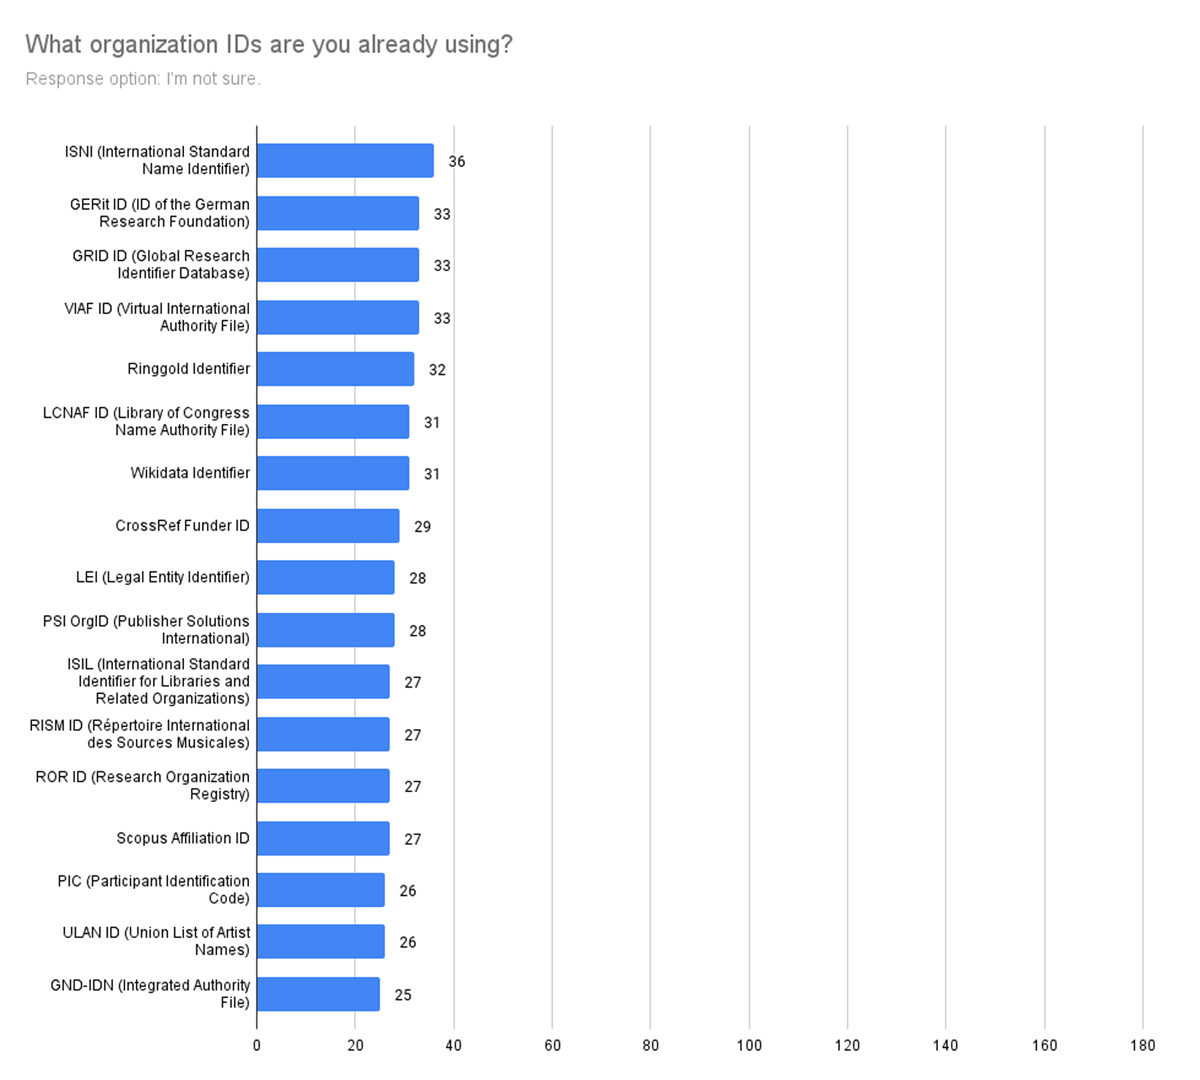 Distribution and number of responses to the question, ‘What organization IDs are you already using?’ (Response option: I’m not sure.)